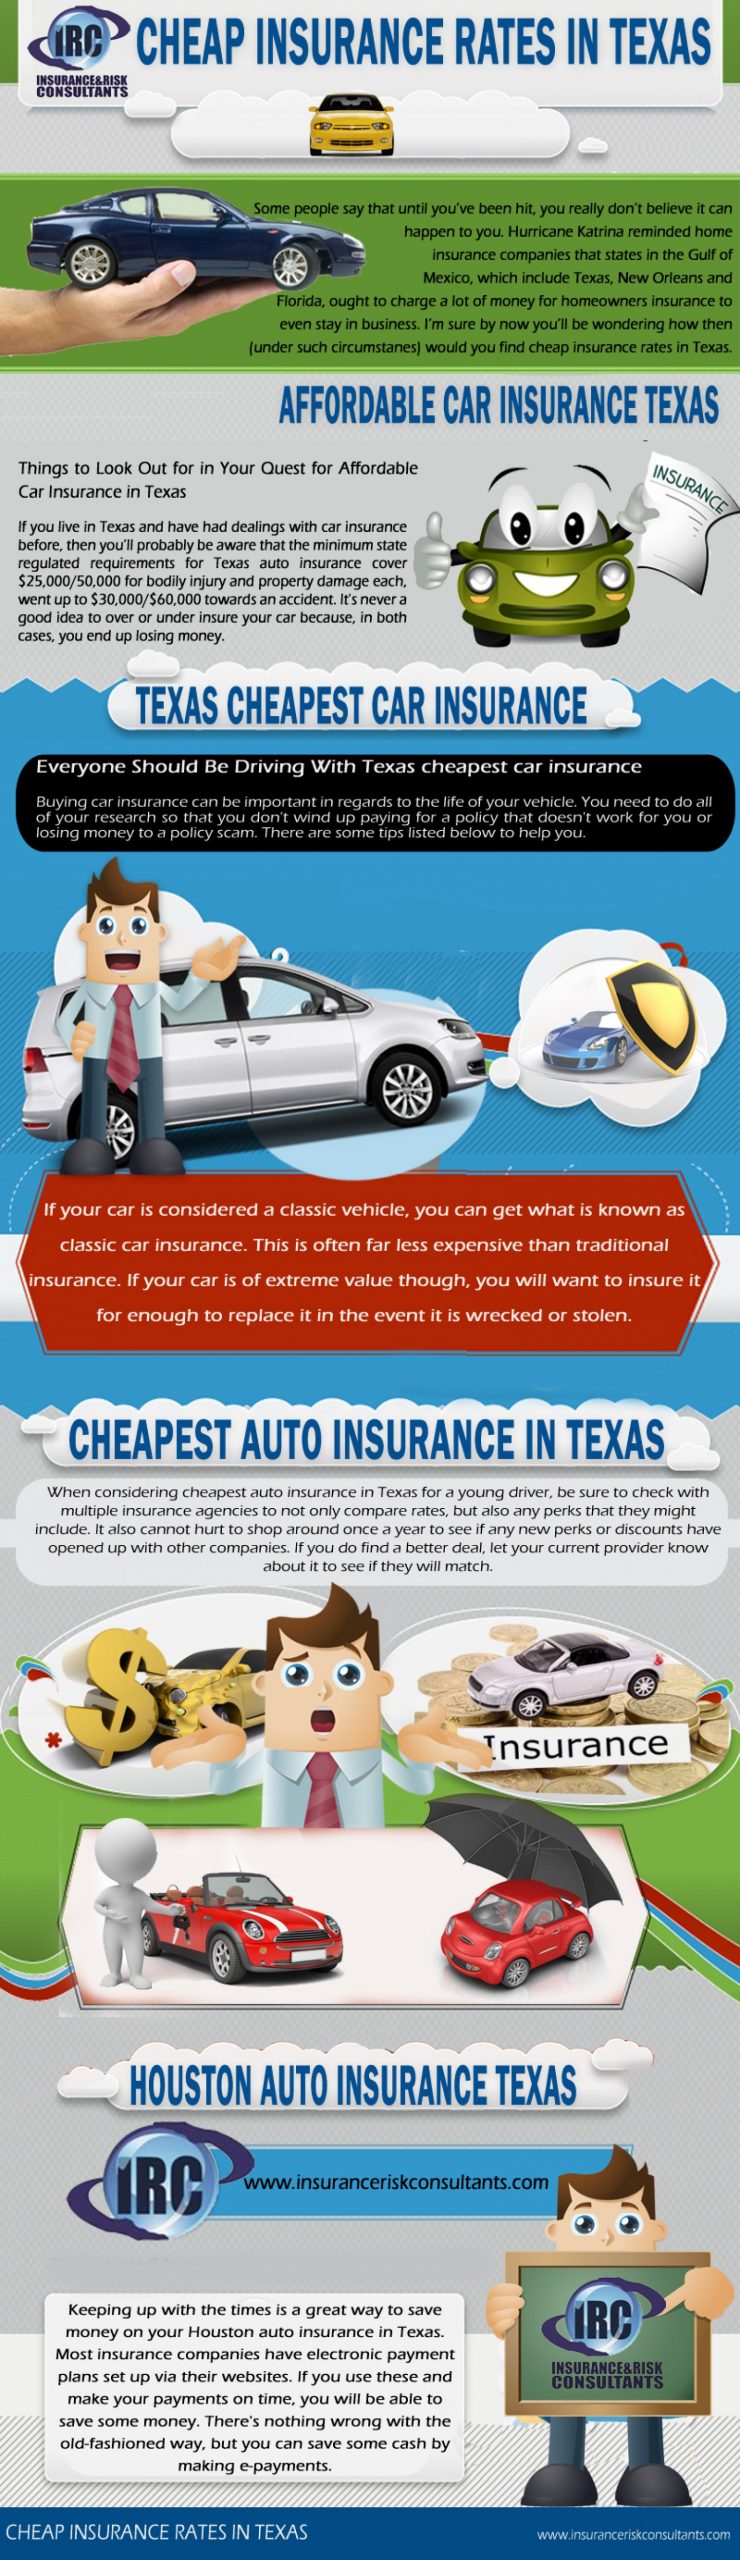 Pin Texas Cheapest On Cheapest Auto Insurance In Texas in dimensions 1500 X 5188